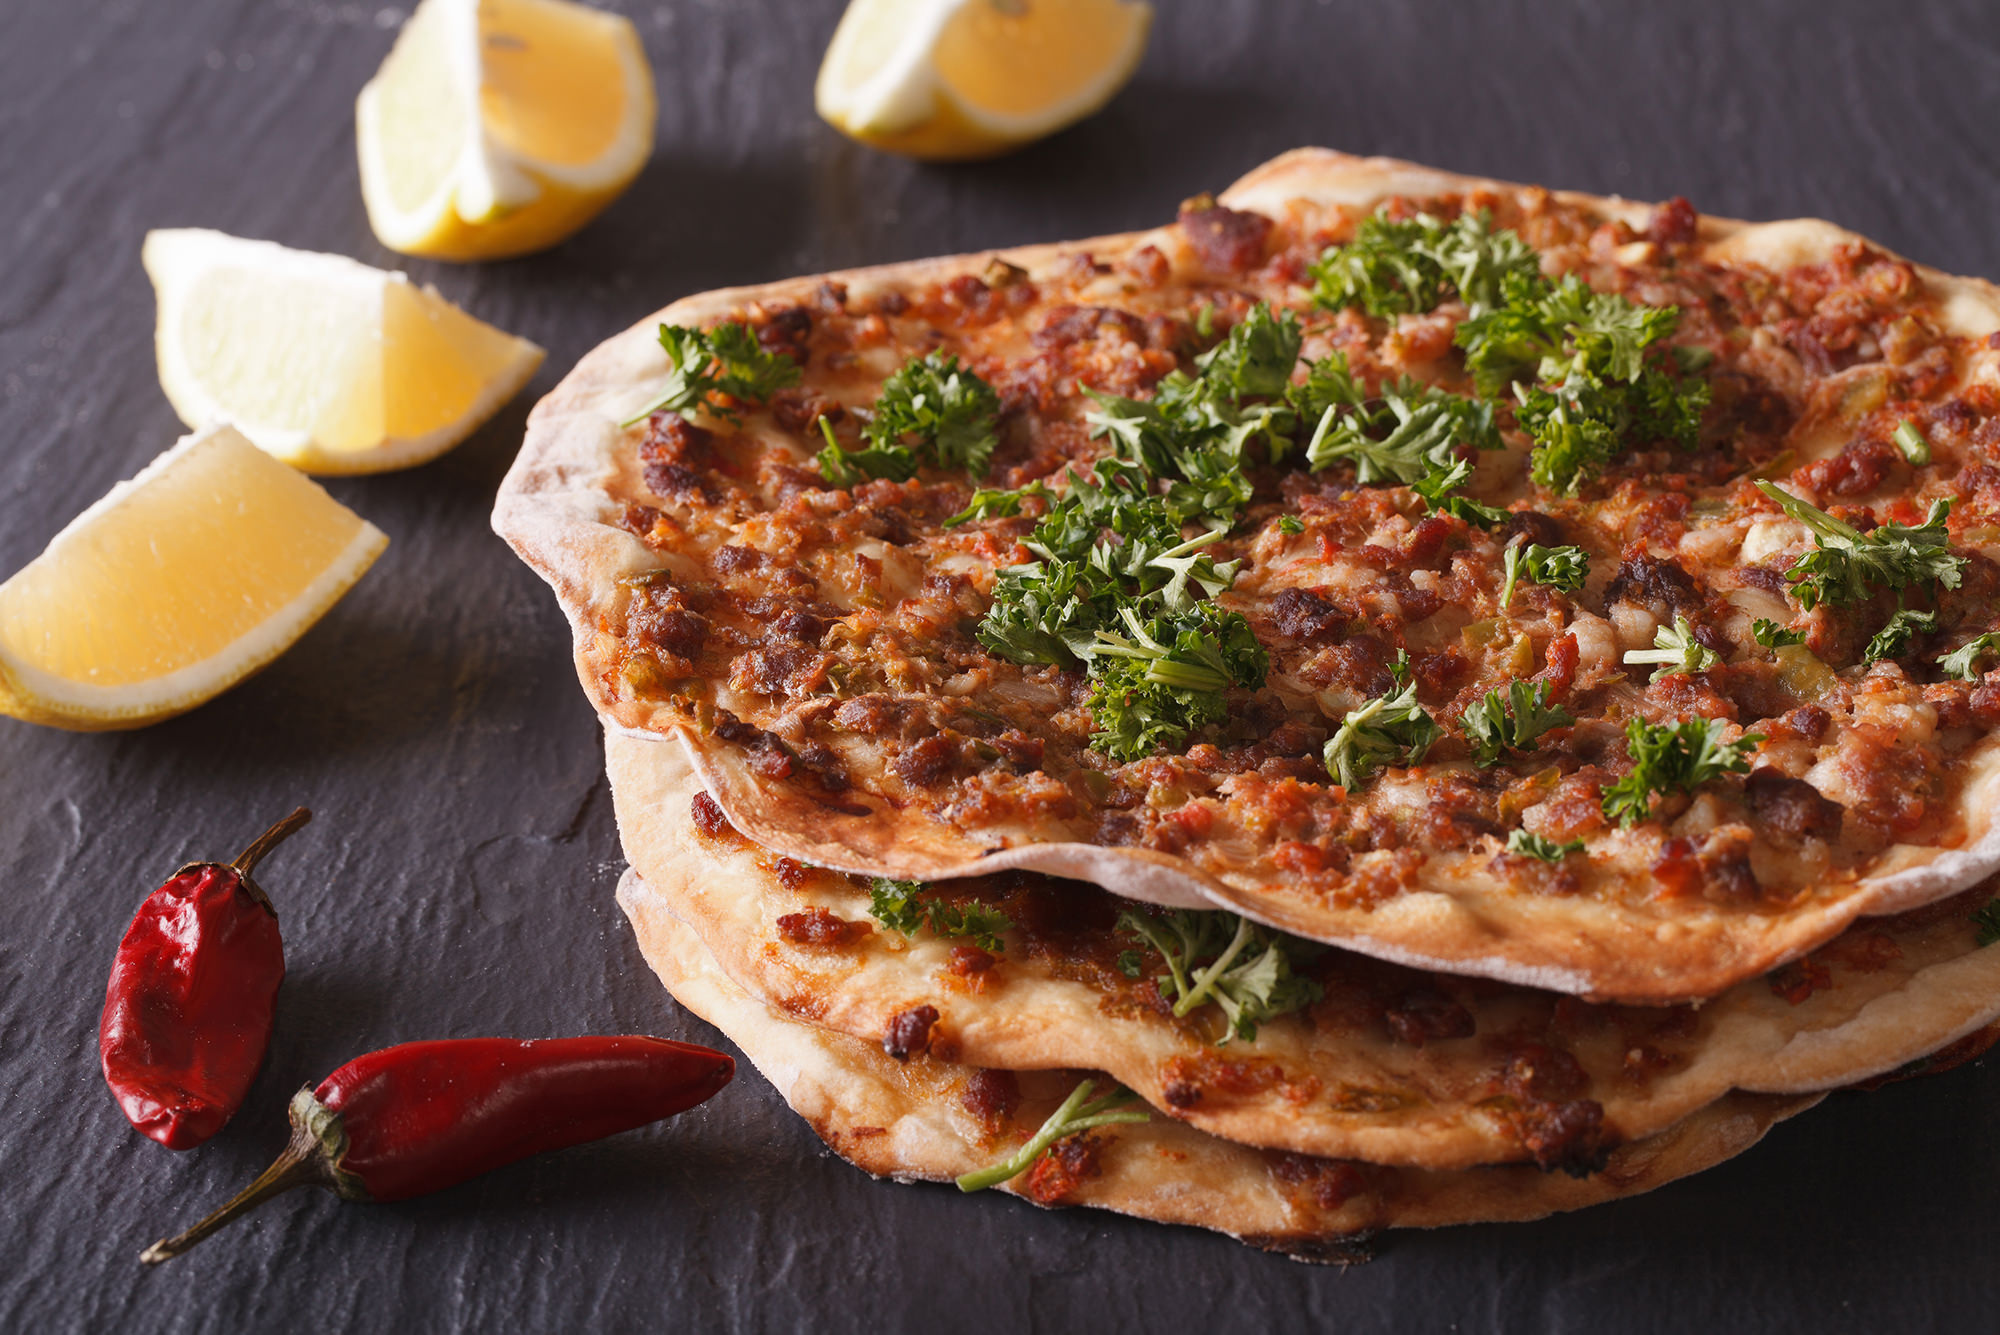 Turkish lahmacun - Right to Health